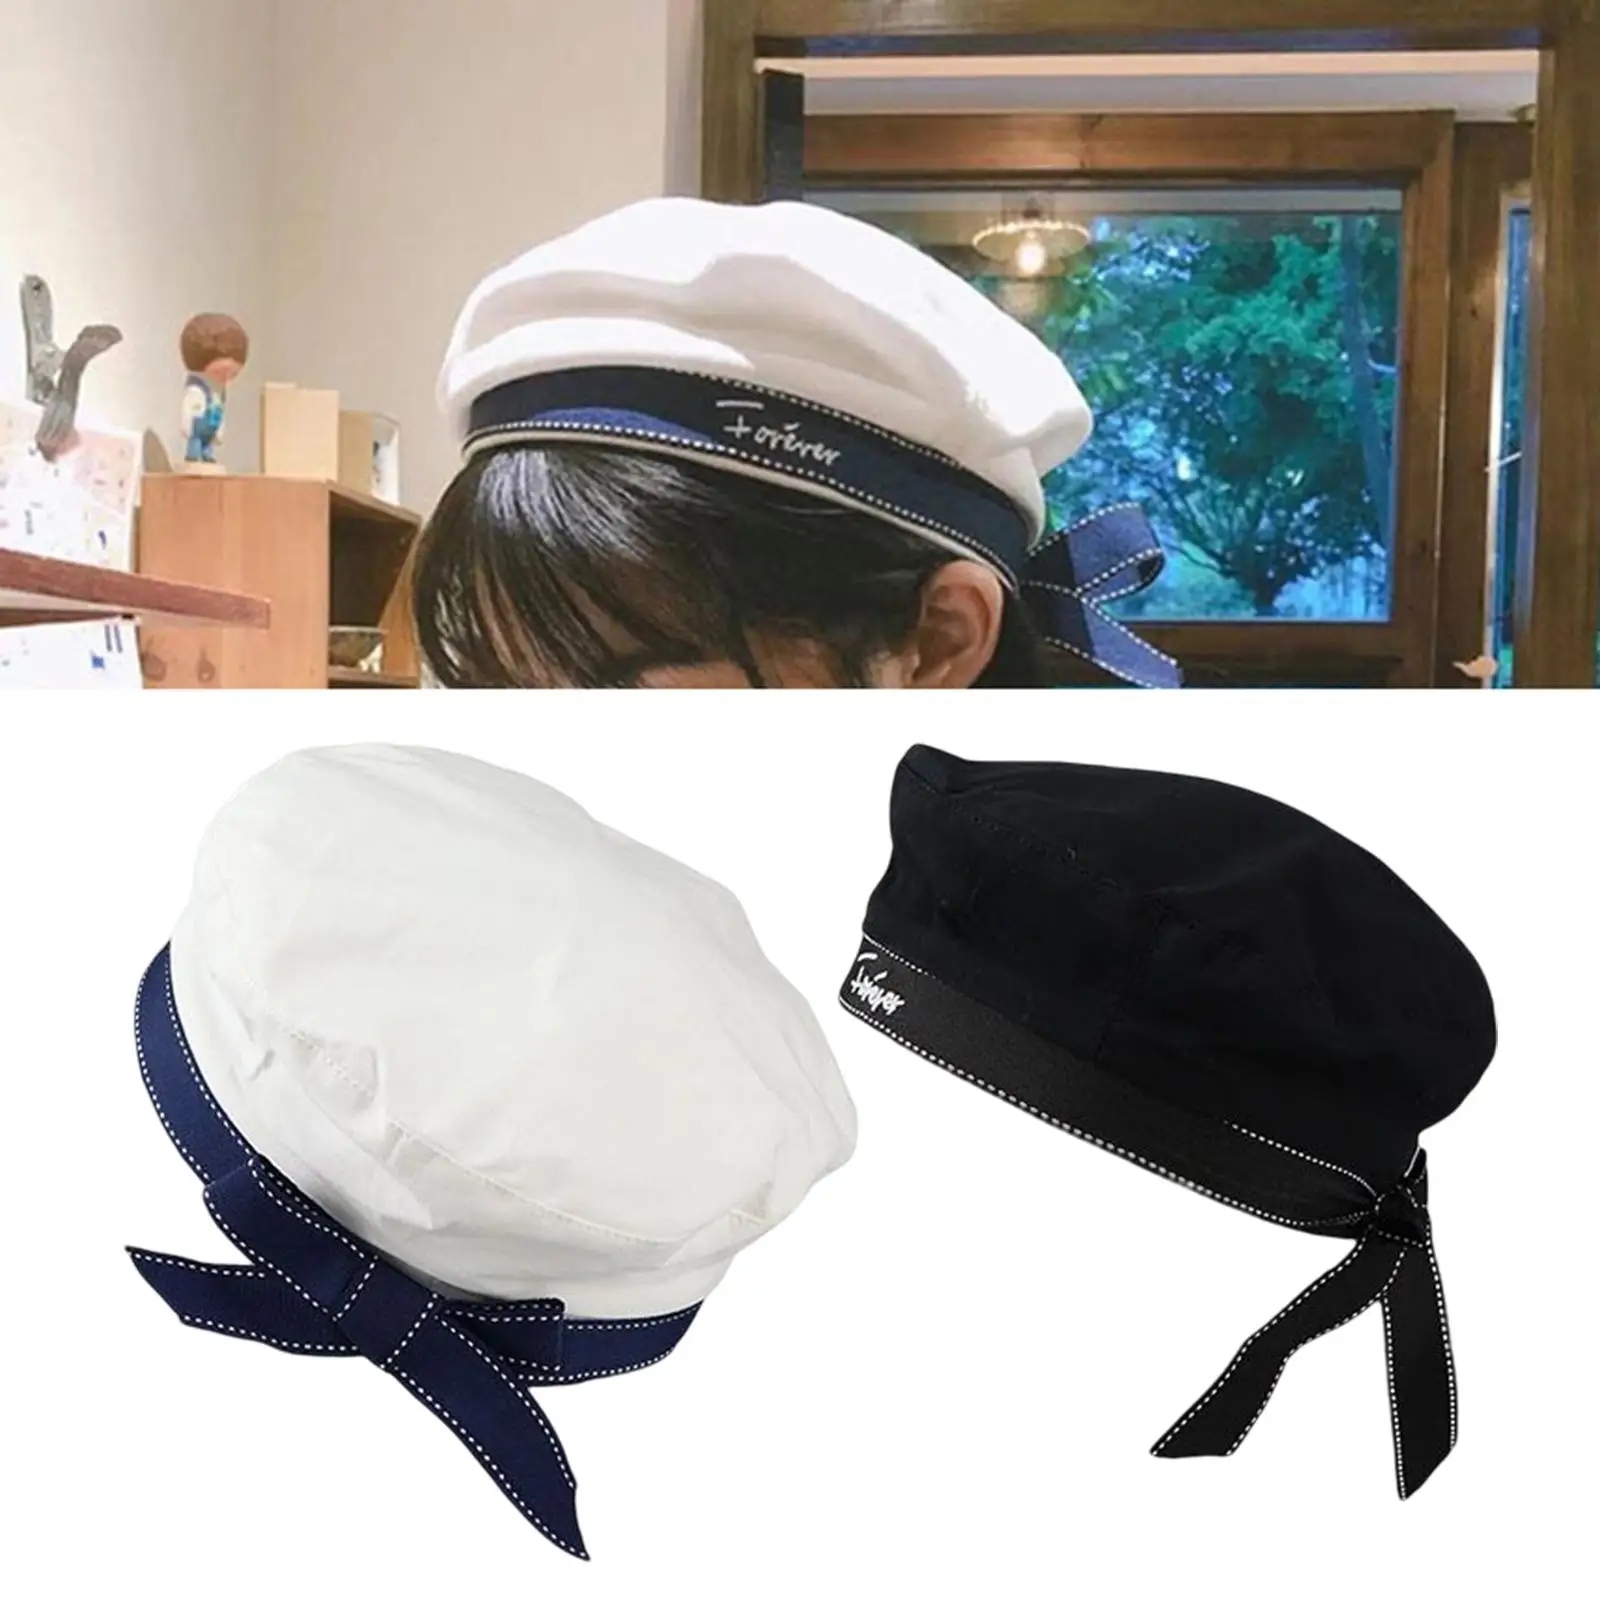 Navy Sailor Hat Costume Accessory Stylish Adjustable Cap for Adult Dress up